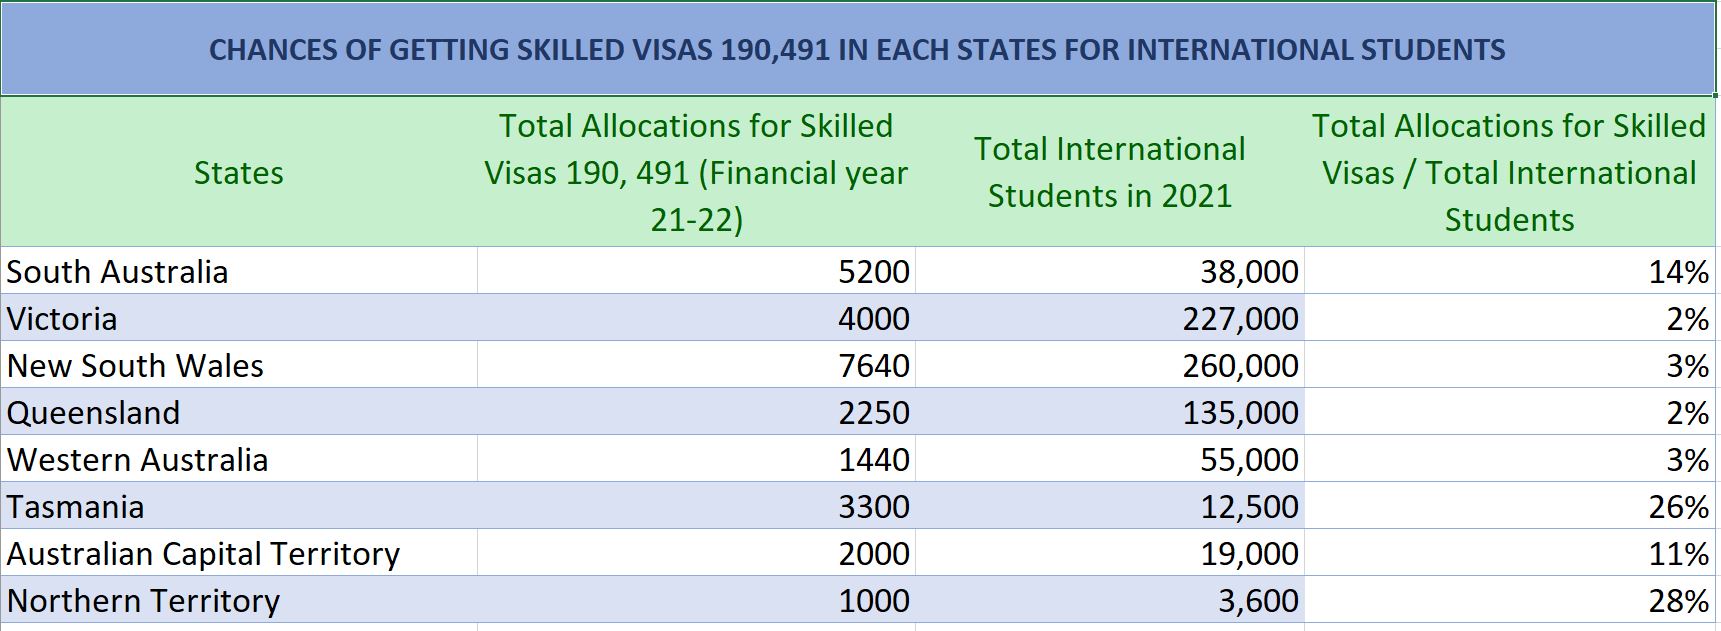 best state for skilled visa 491 and 190